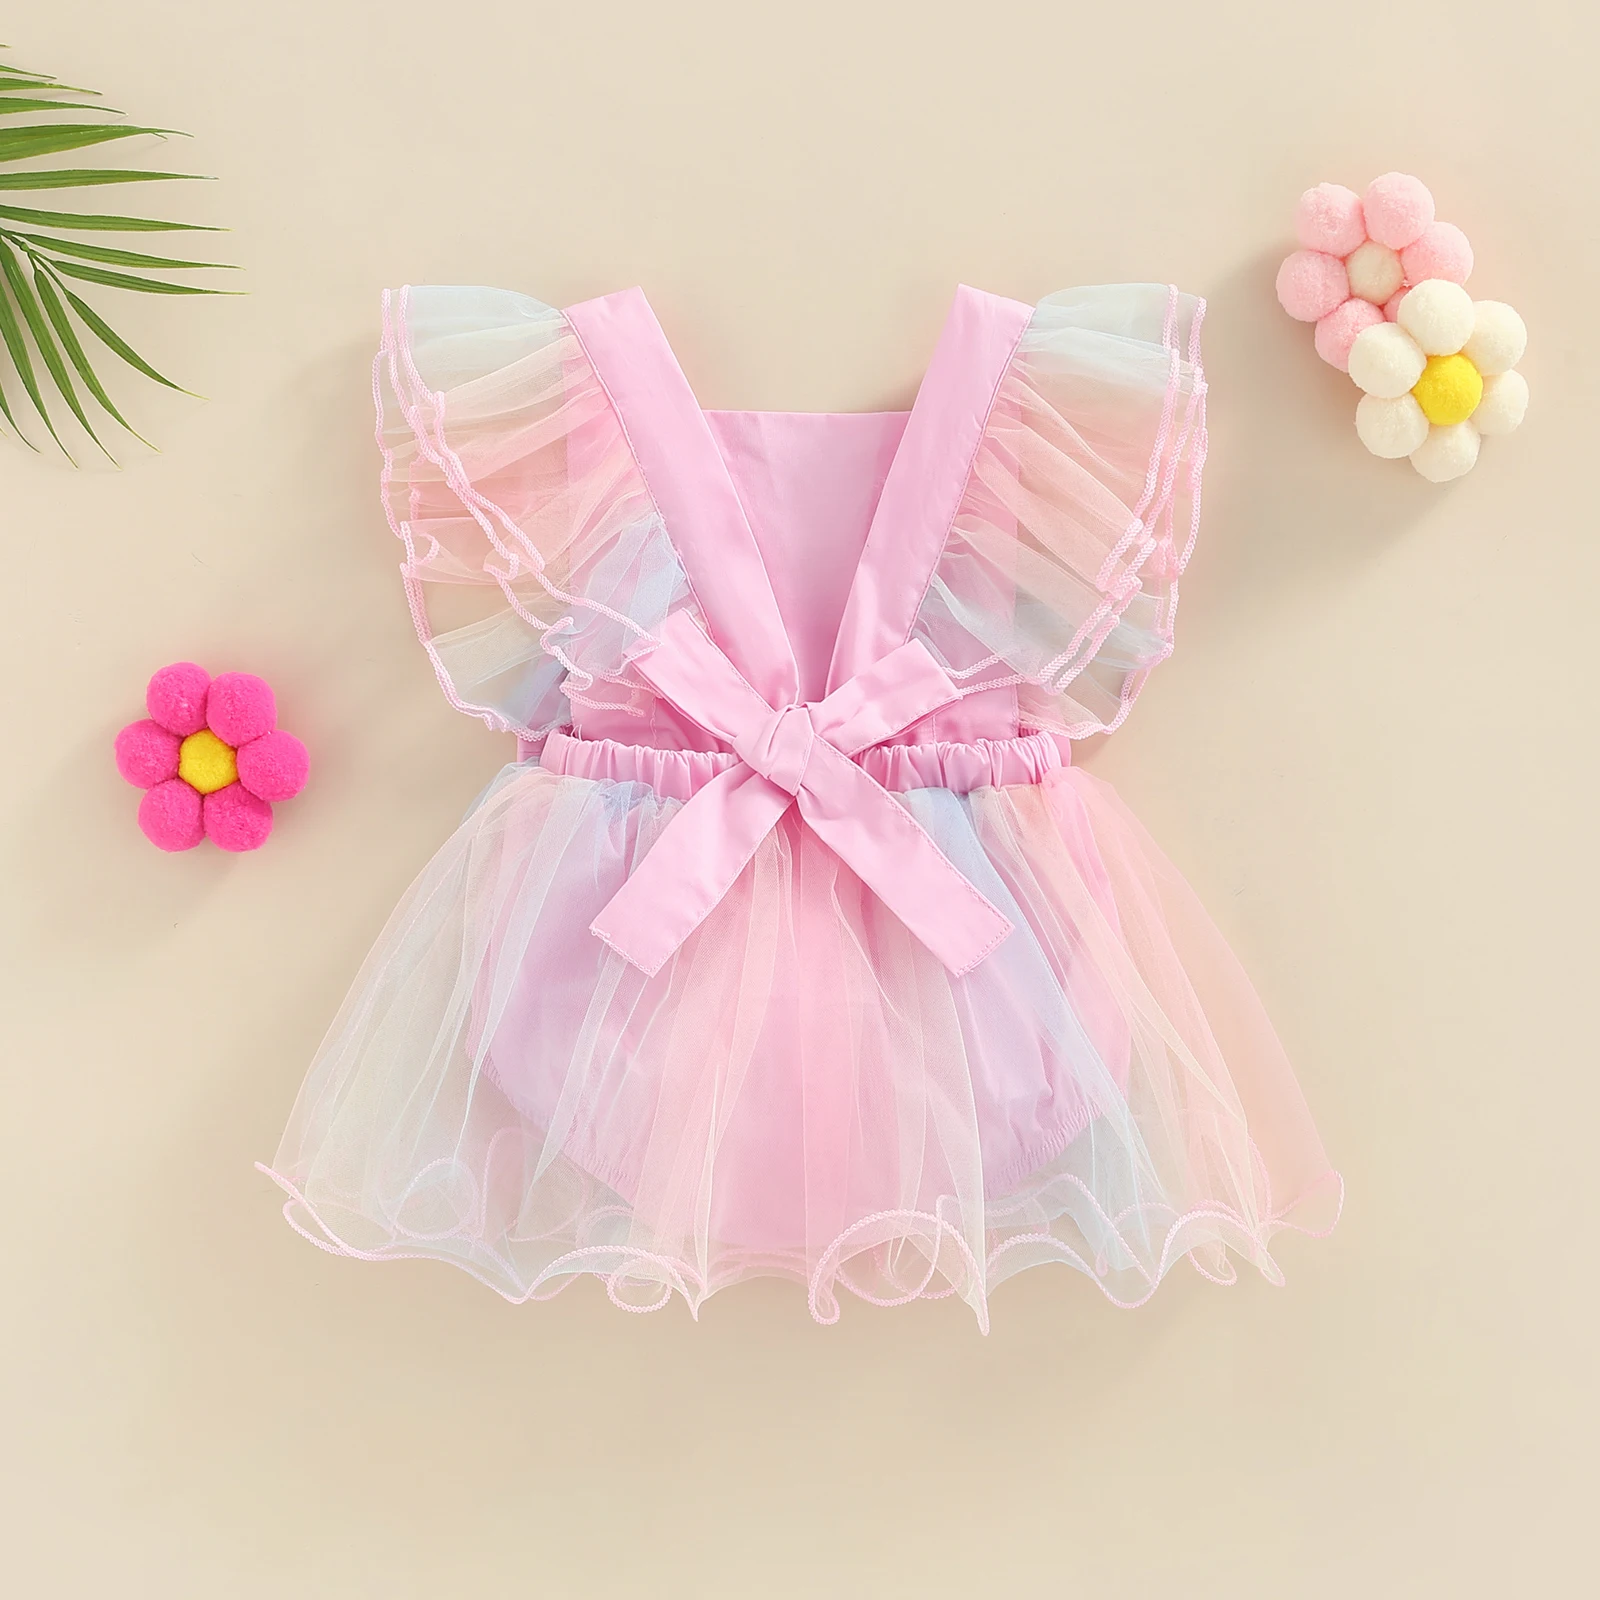 ma&baby 0-24M Newborn Infant Baby Girl Romper Princess Rainbow Tulle Ruffle Jumpsuit Playsuit Birthday Clothing Summer D01 Baby Bodysuits for girl 